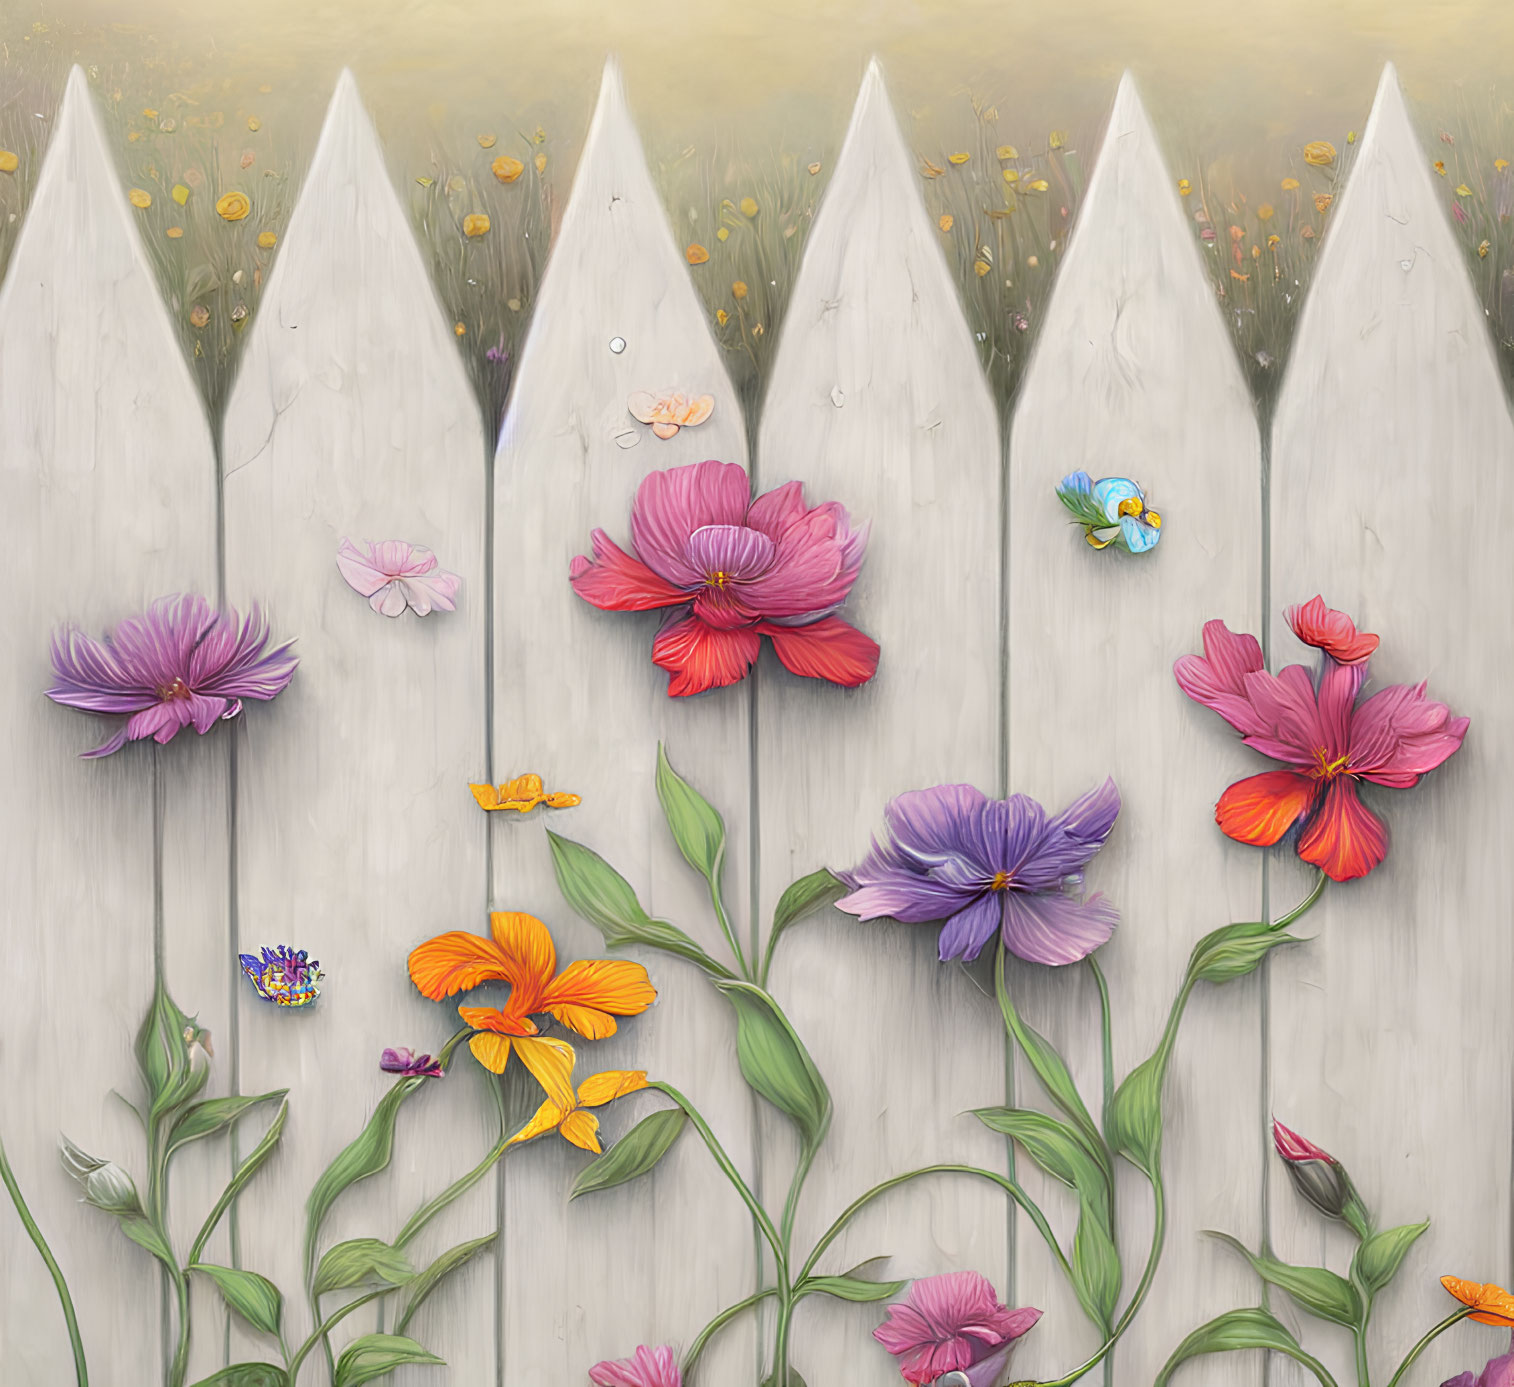 Colorful Flowers and Butterflies on White Wooden Fence in Foggy Setting